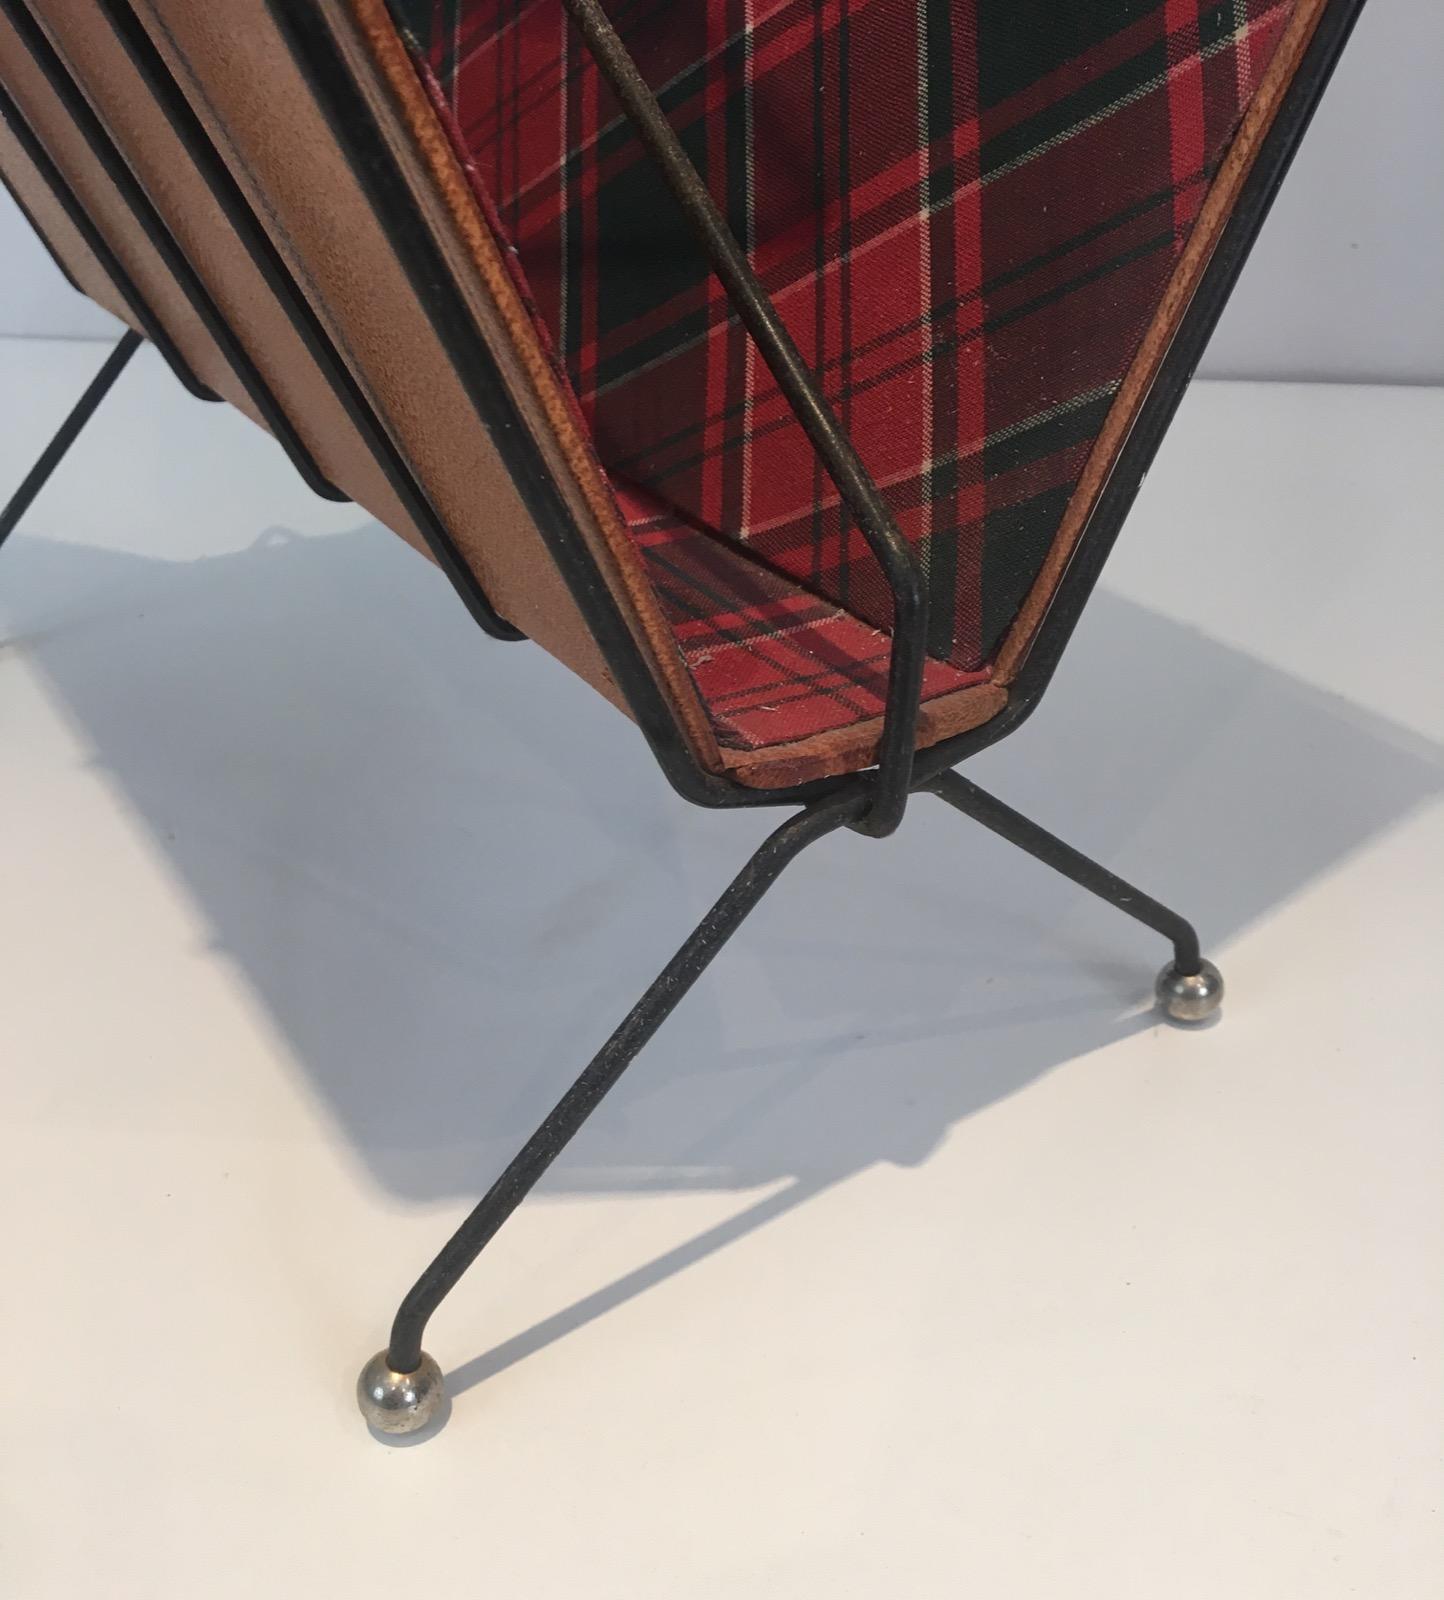 Rare Black Lacquered Metal, Leather and Plaid Fabric Magazine Rack For Sale 1